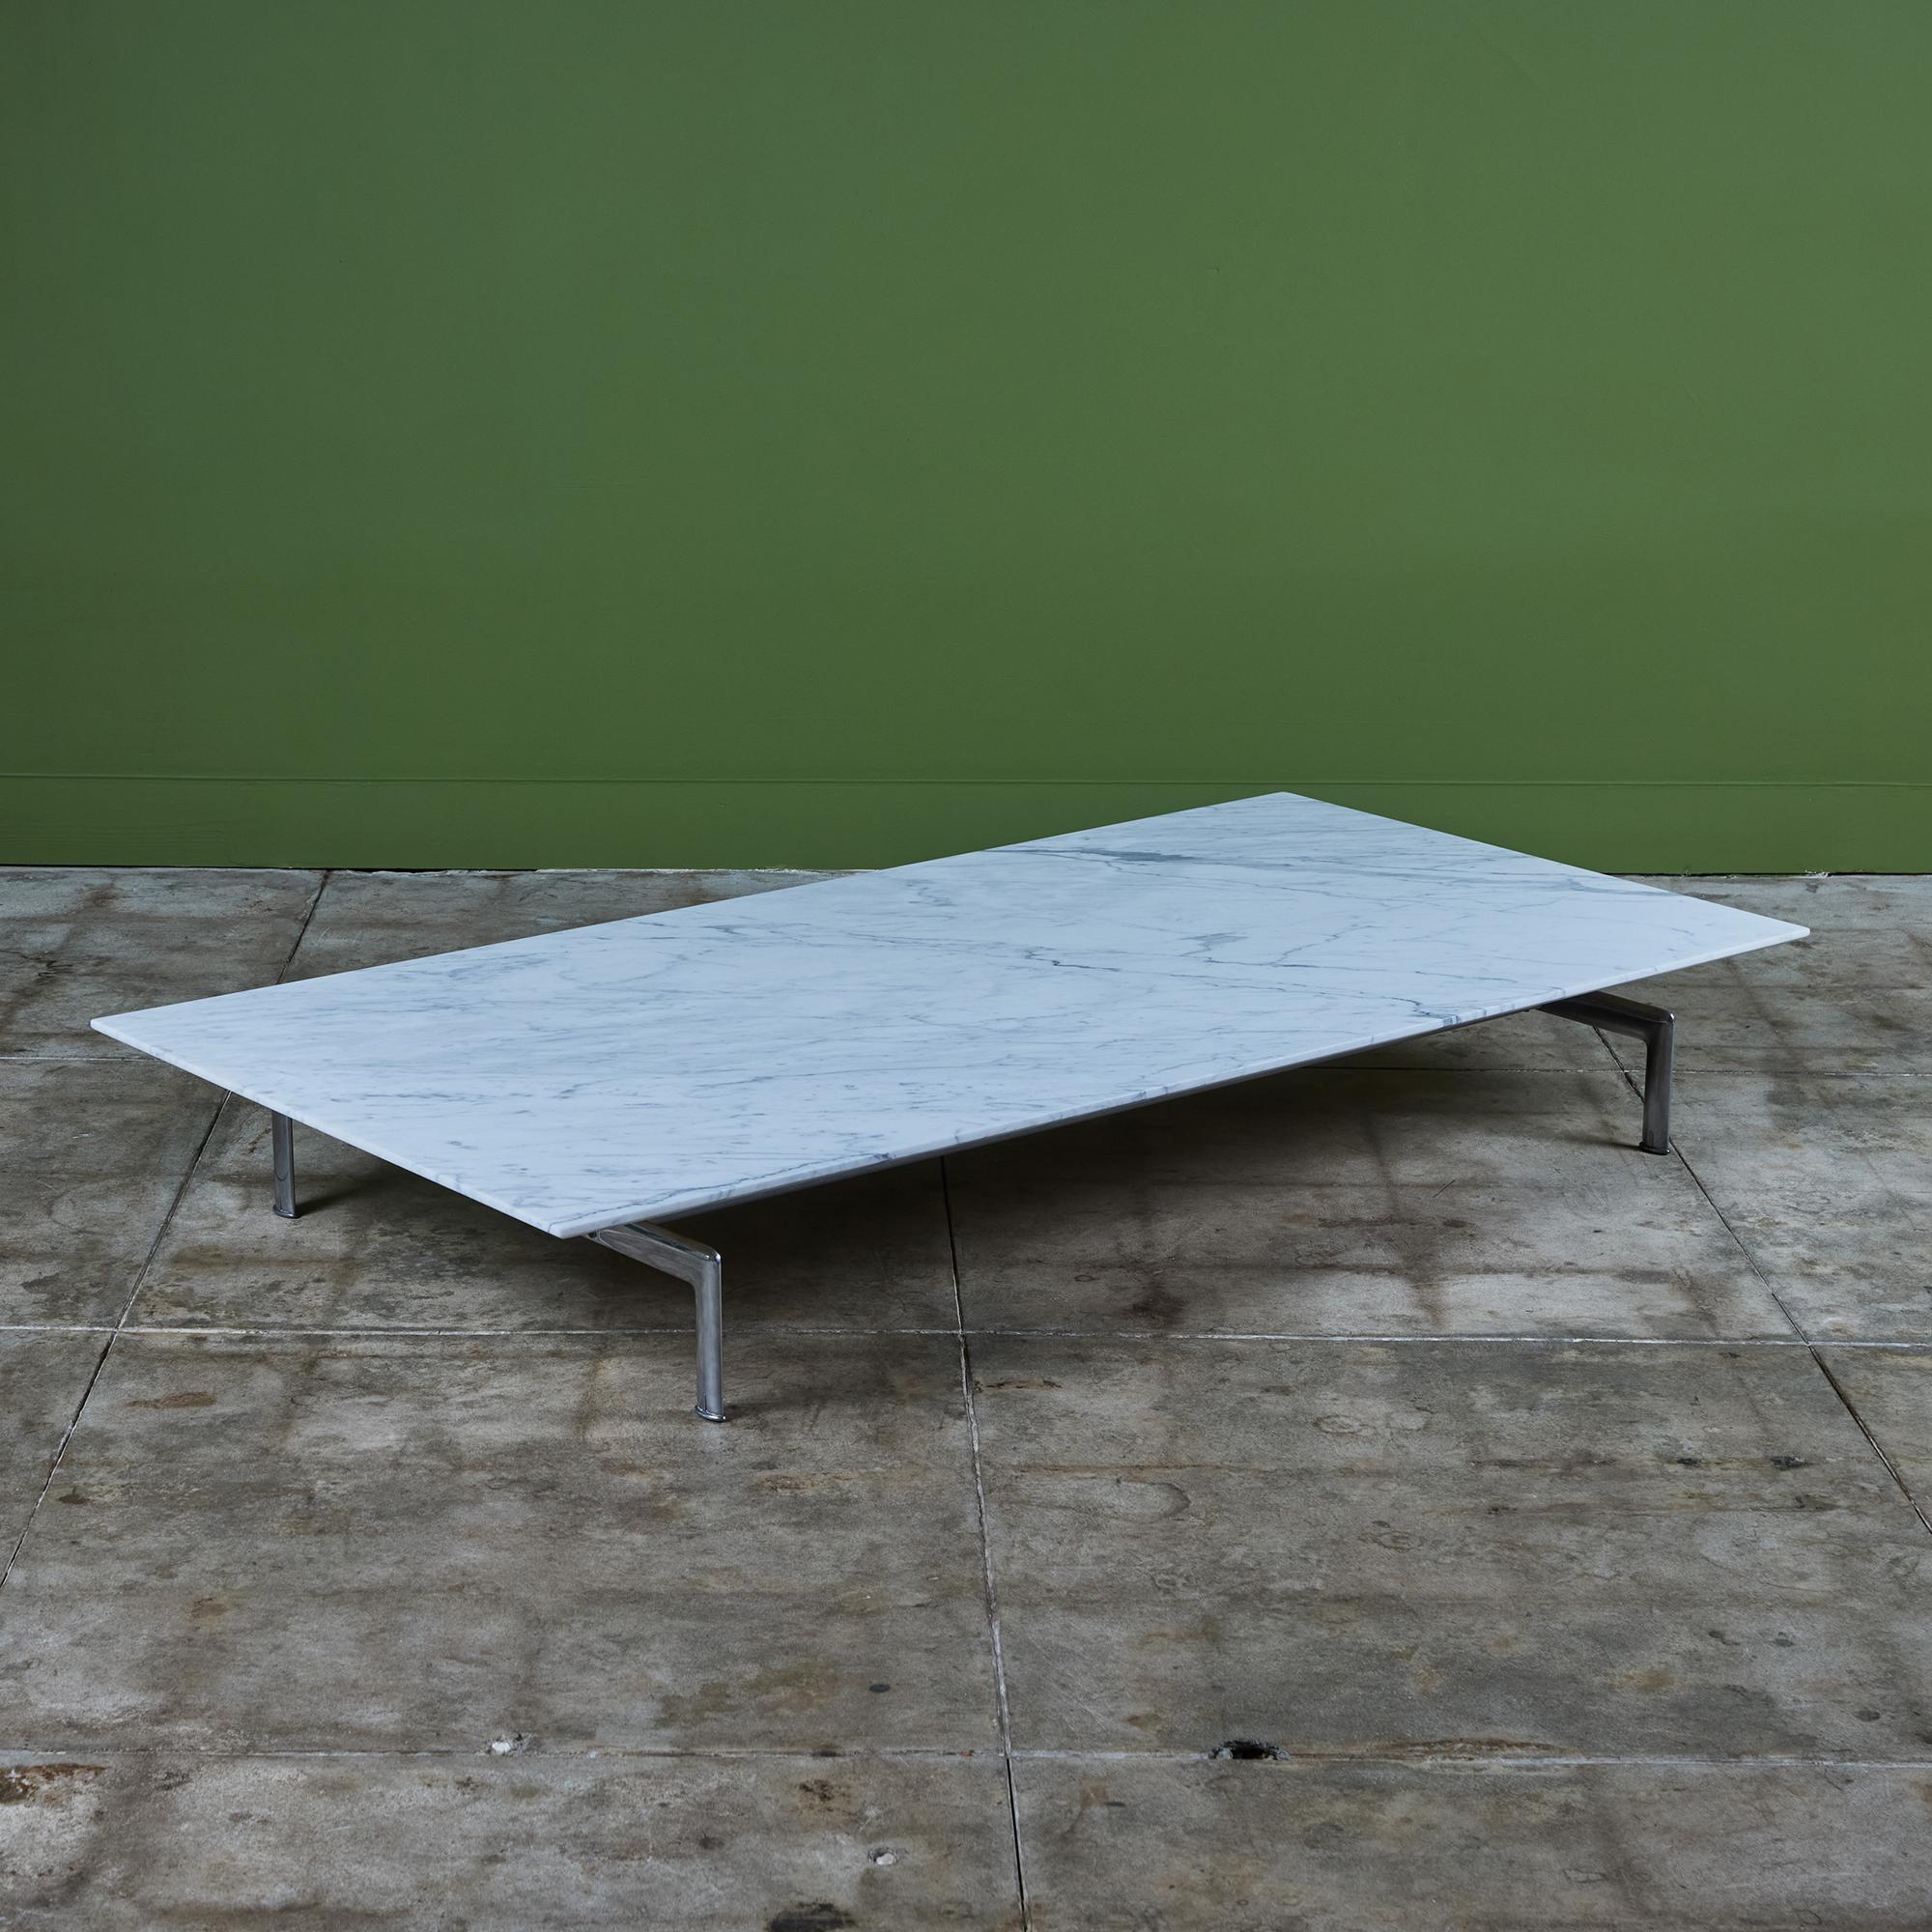 Diesis Marble Coffee Table by Antonio Citterio for B&B Italia c.1970's, Italy. The table features a large white marble rectangular top with distinct gray veining. The marble top rests on a die-cast aluminum base.
 
Dimensions
74.75